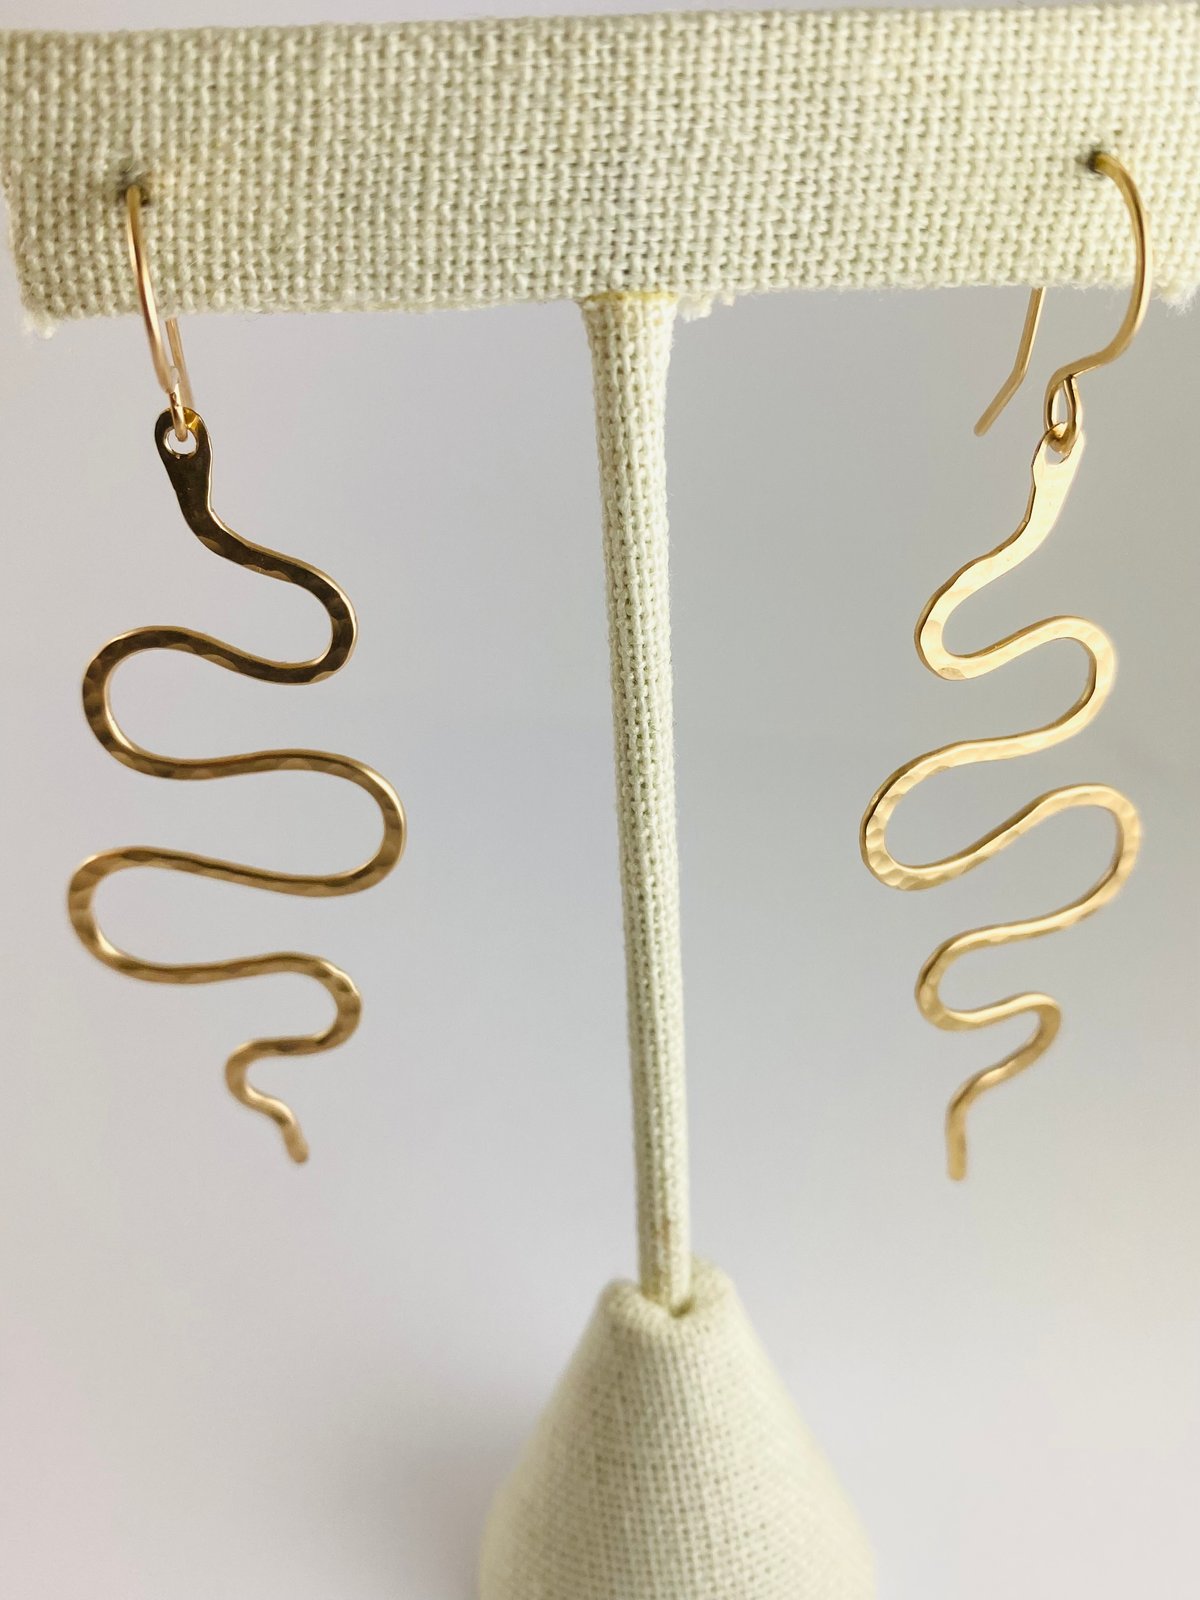 Image of Hanging Golden Snakes 